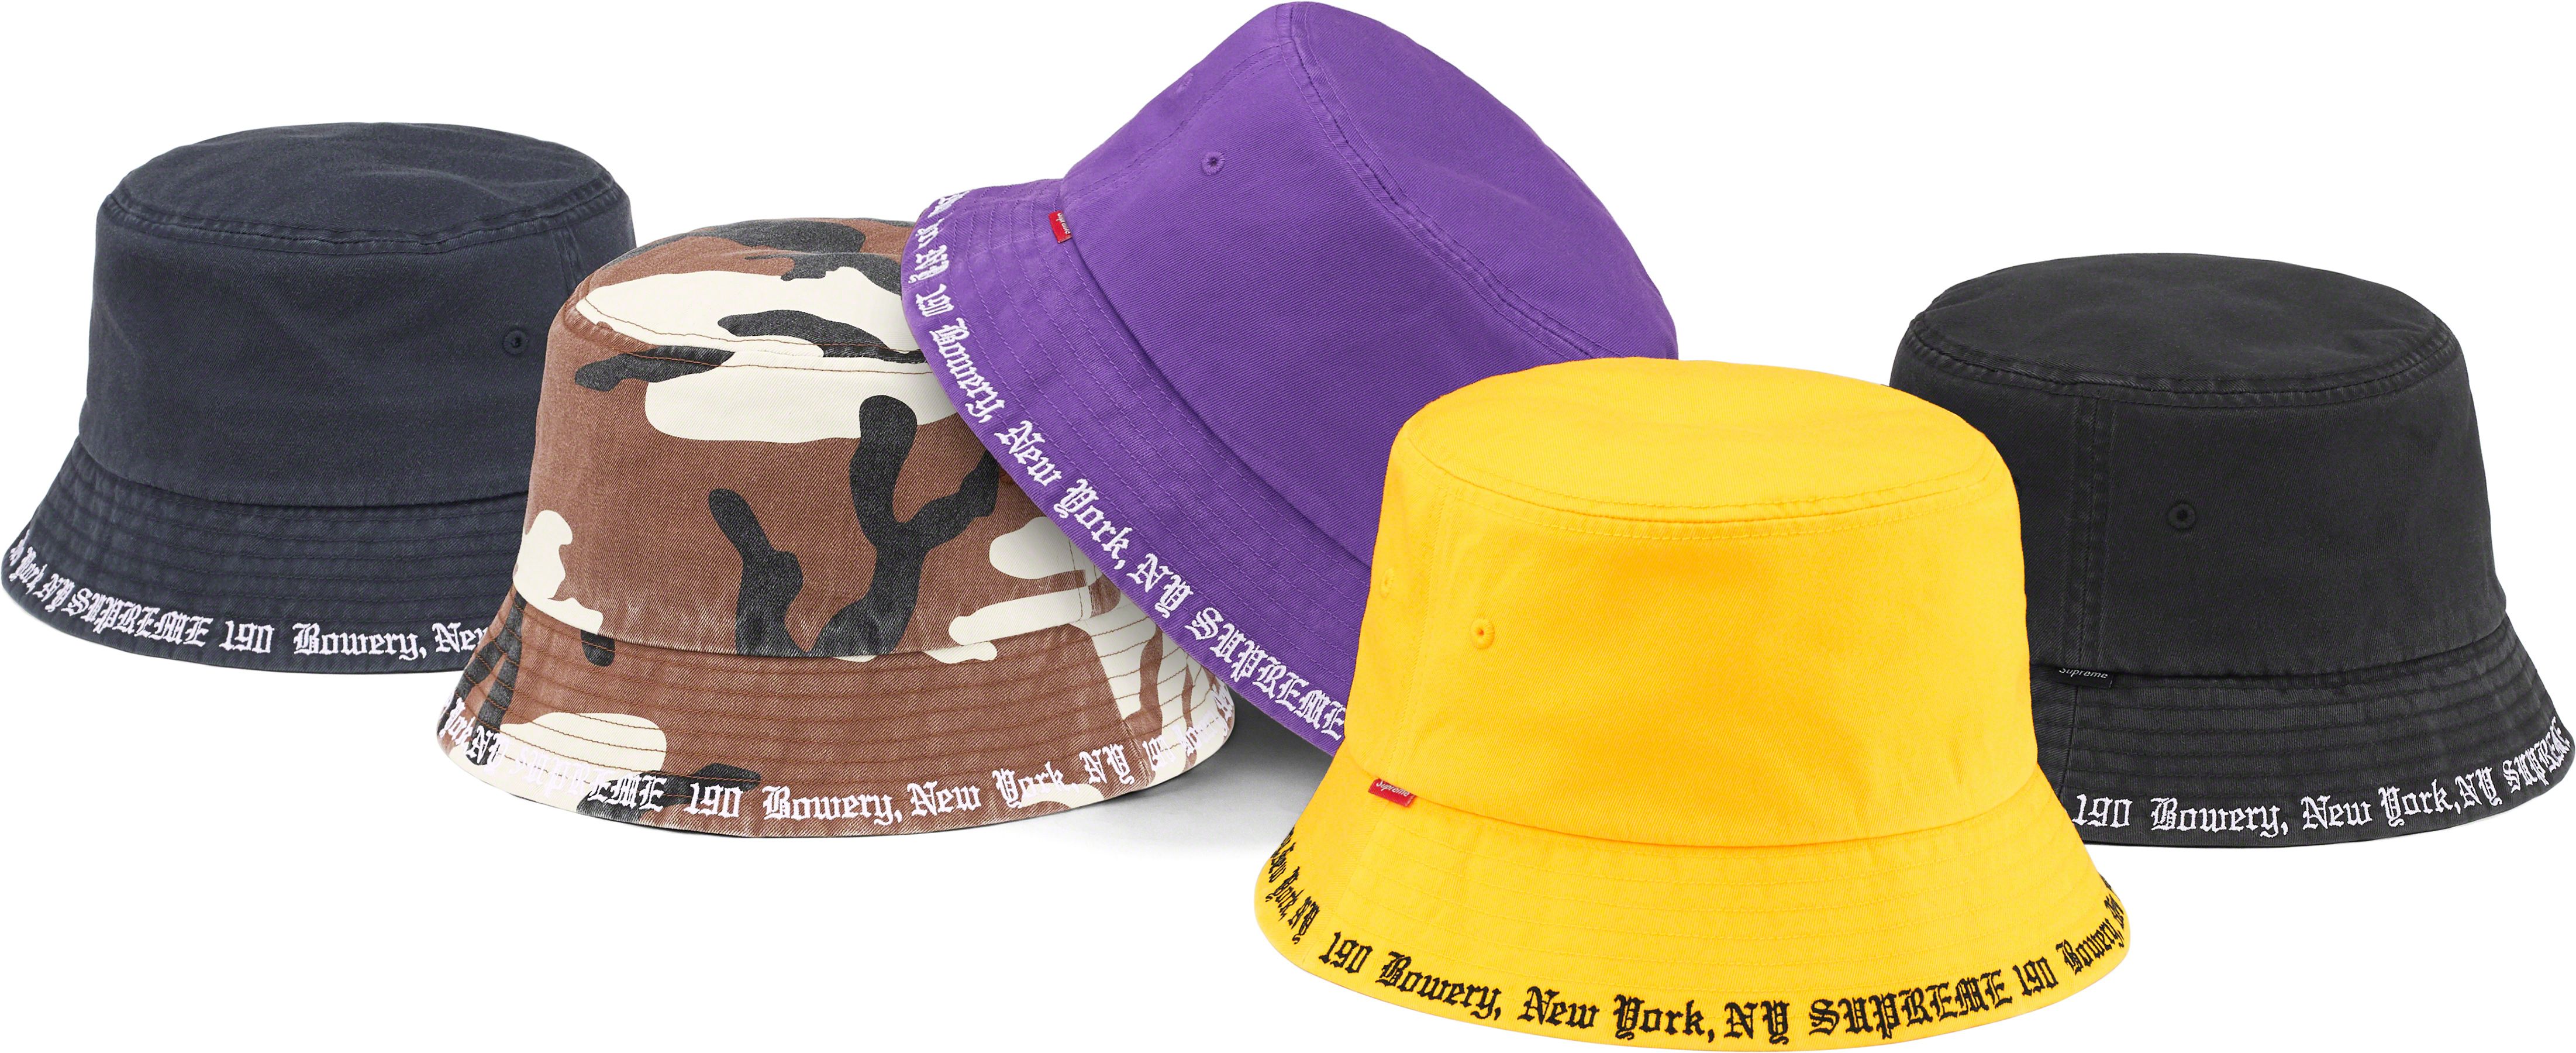 Terry Pattern Crusher - Spring/Summer 2023 Preview – Supreme